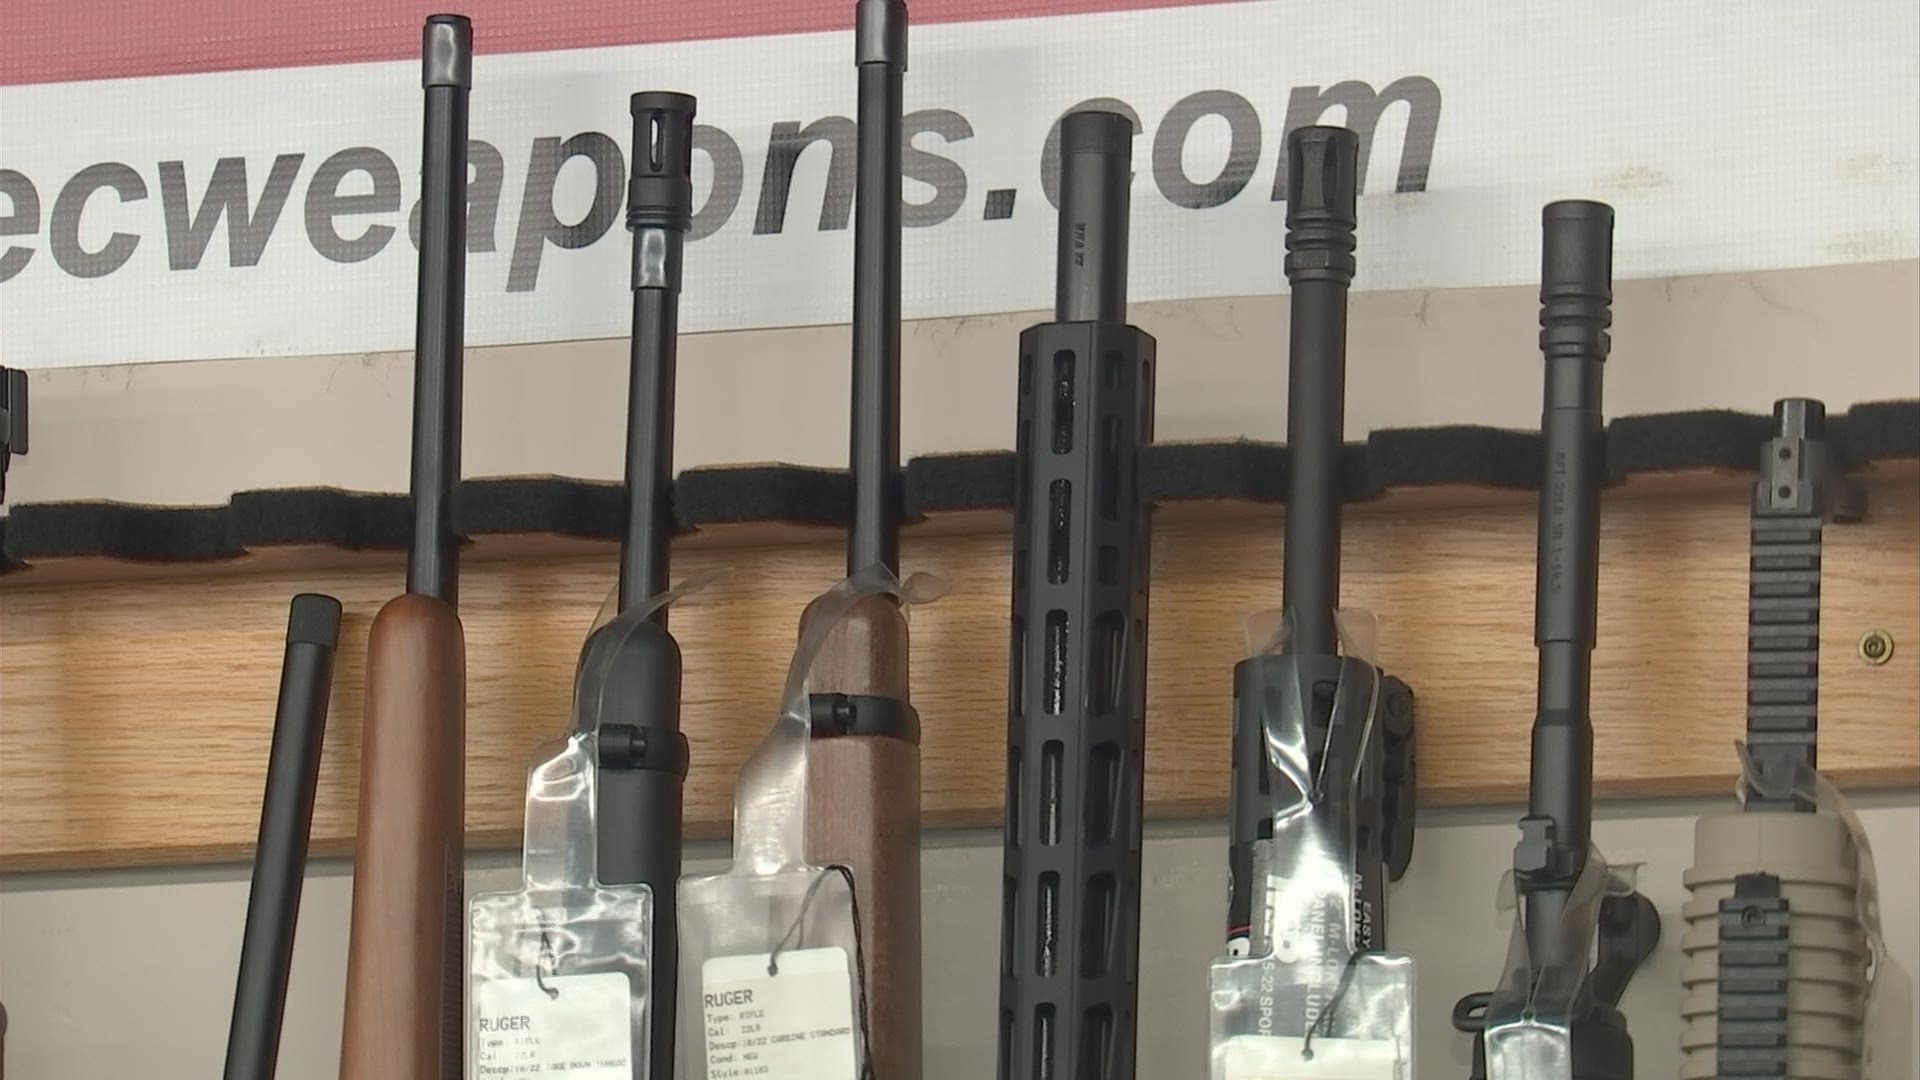 The state has filed an appeal in the 10th Circuit Court of Appeal to stop the city from regulating guns, claiming Ohio law says it’s the job of the state.